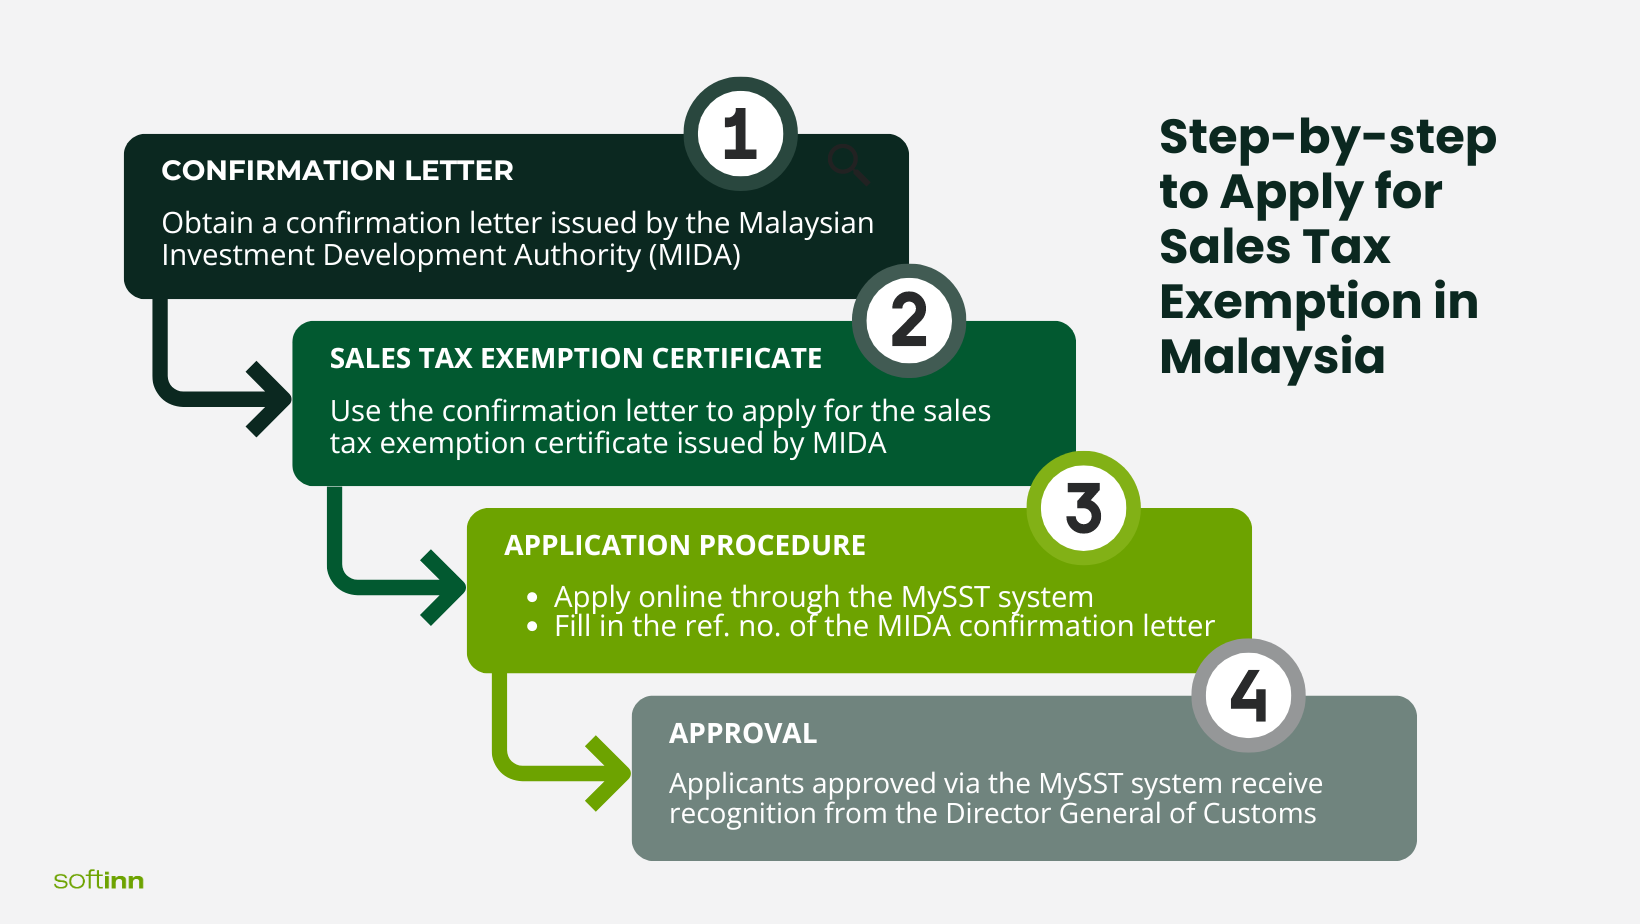 Step-by-step to Apply for Sales Tax Exemption in Malaysia